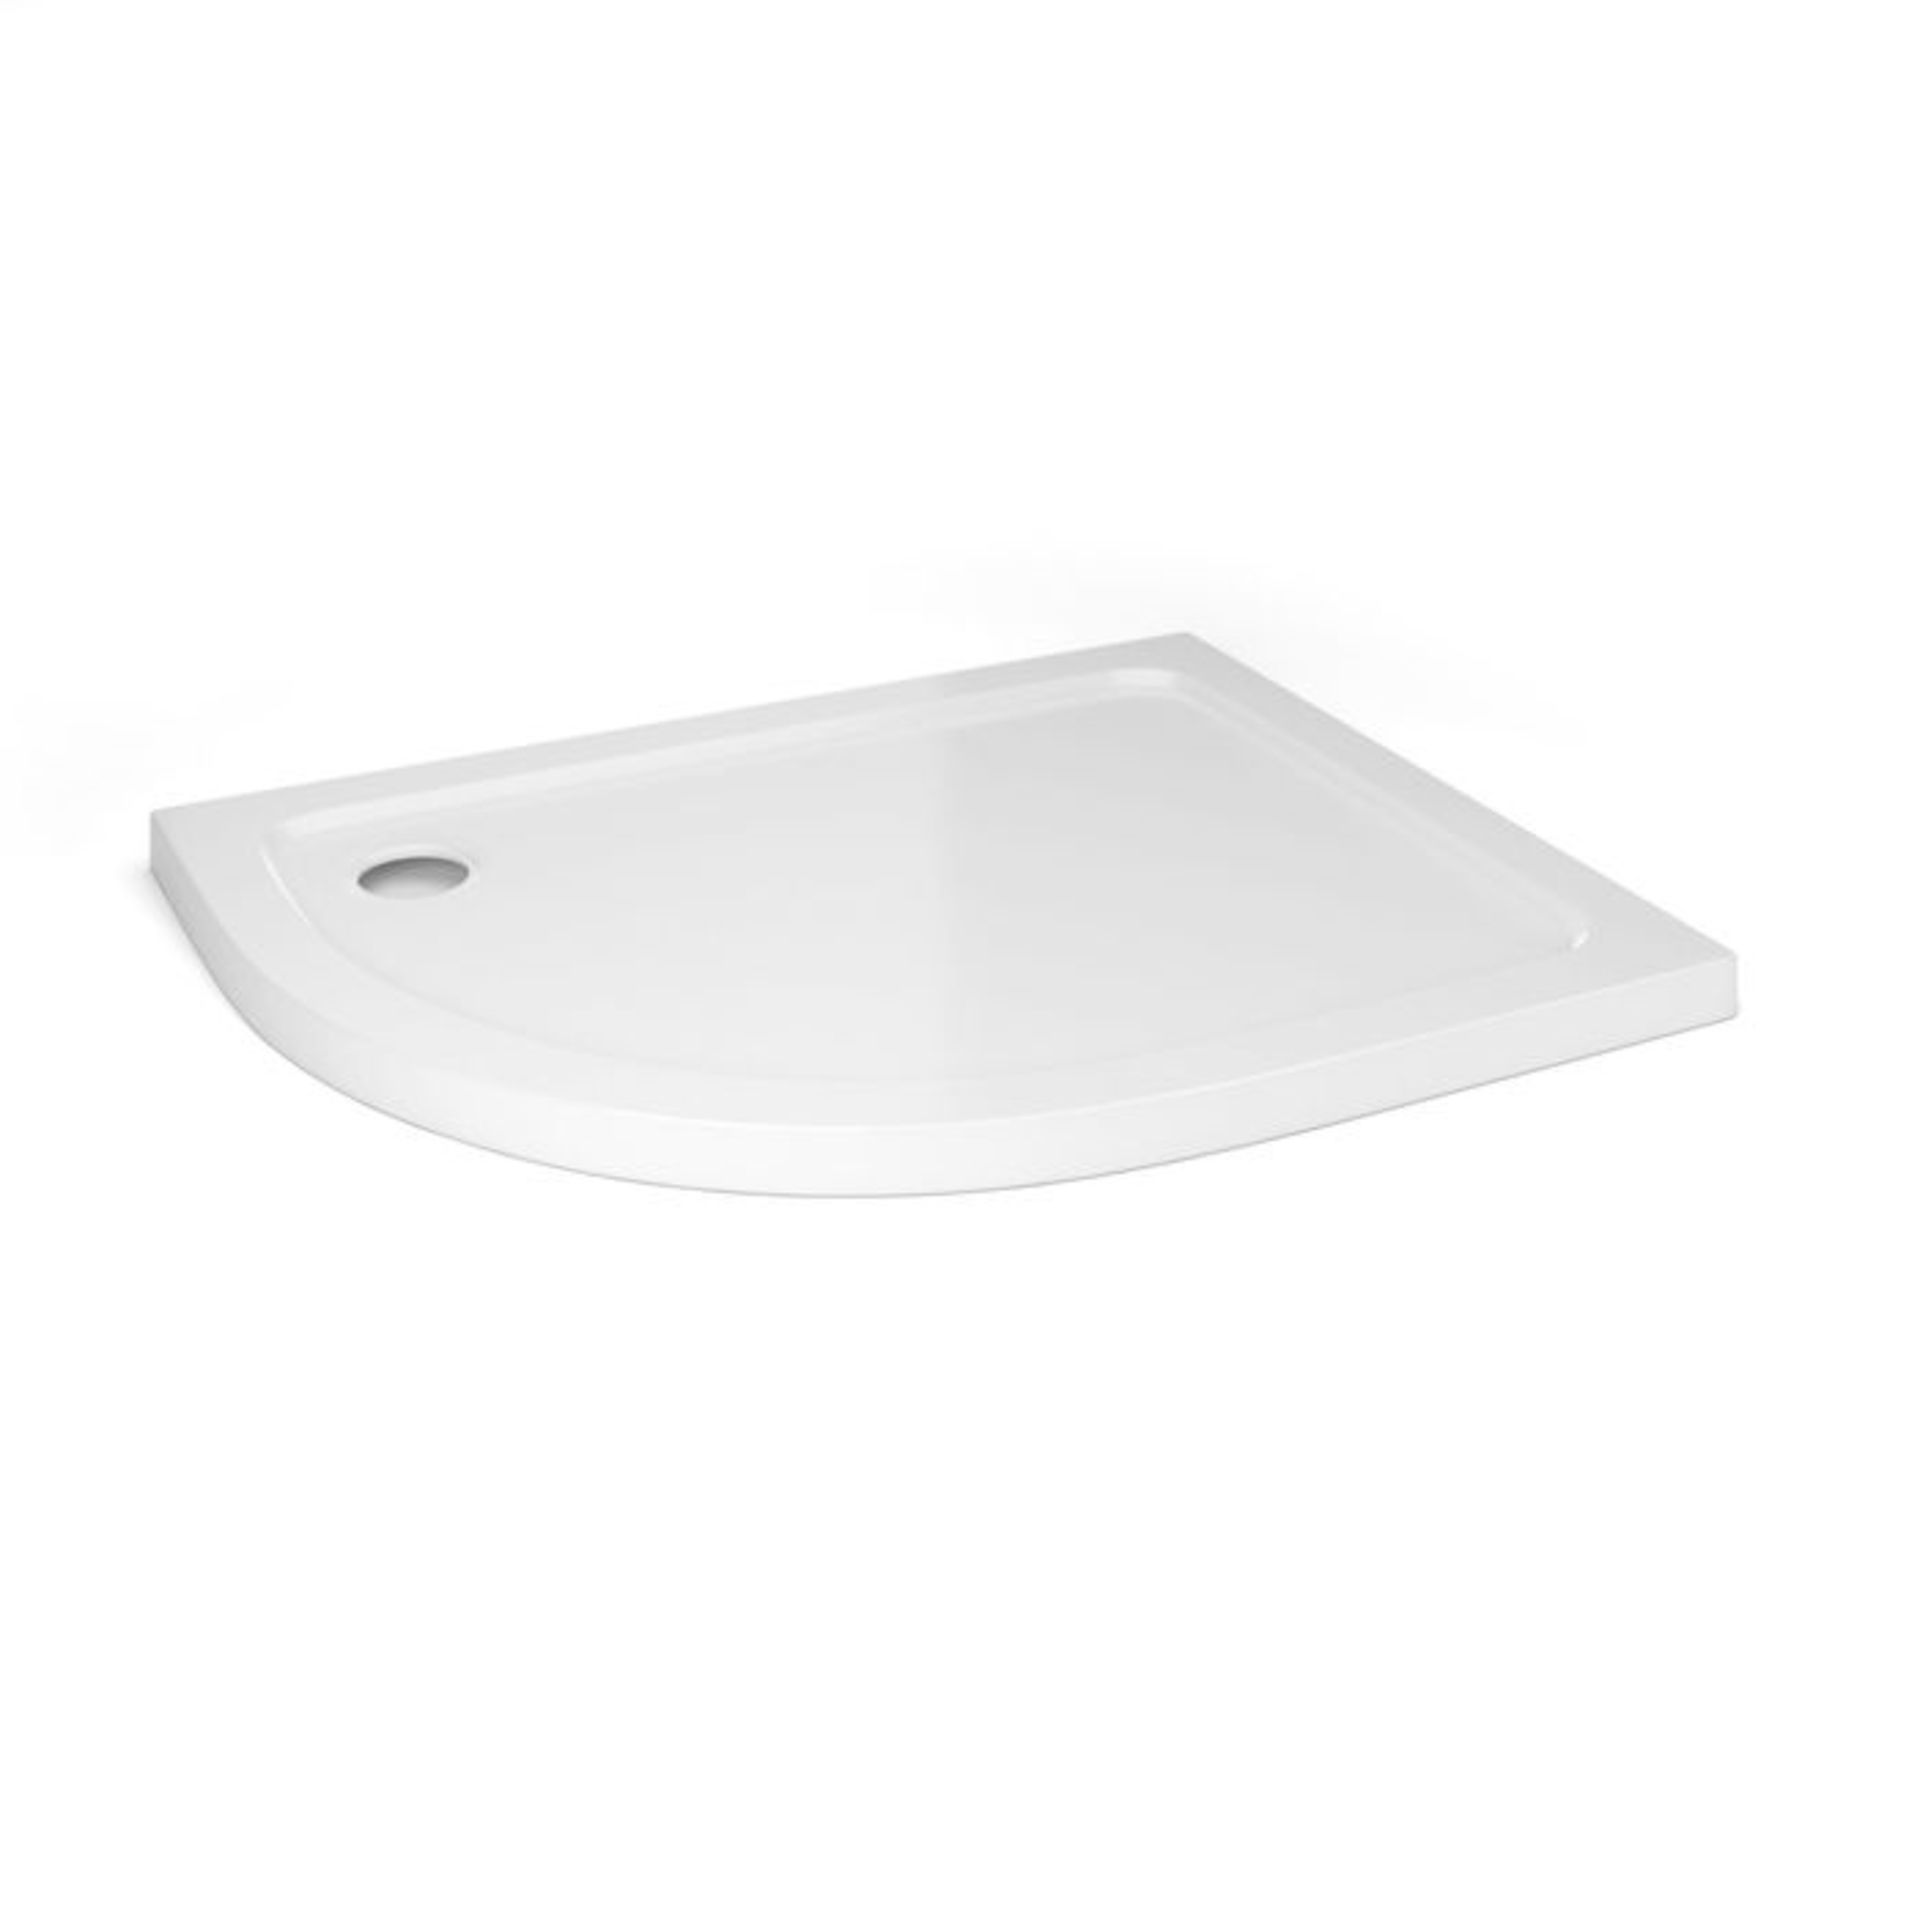 Brand New (MW196) 1000x800mm Offset Quadrant Ultra Slim Stone Shower Tray - Left. Constructed from a - Image 2 of 2